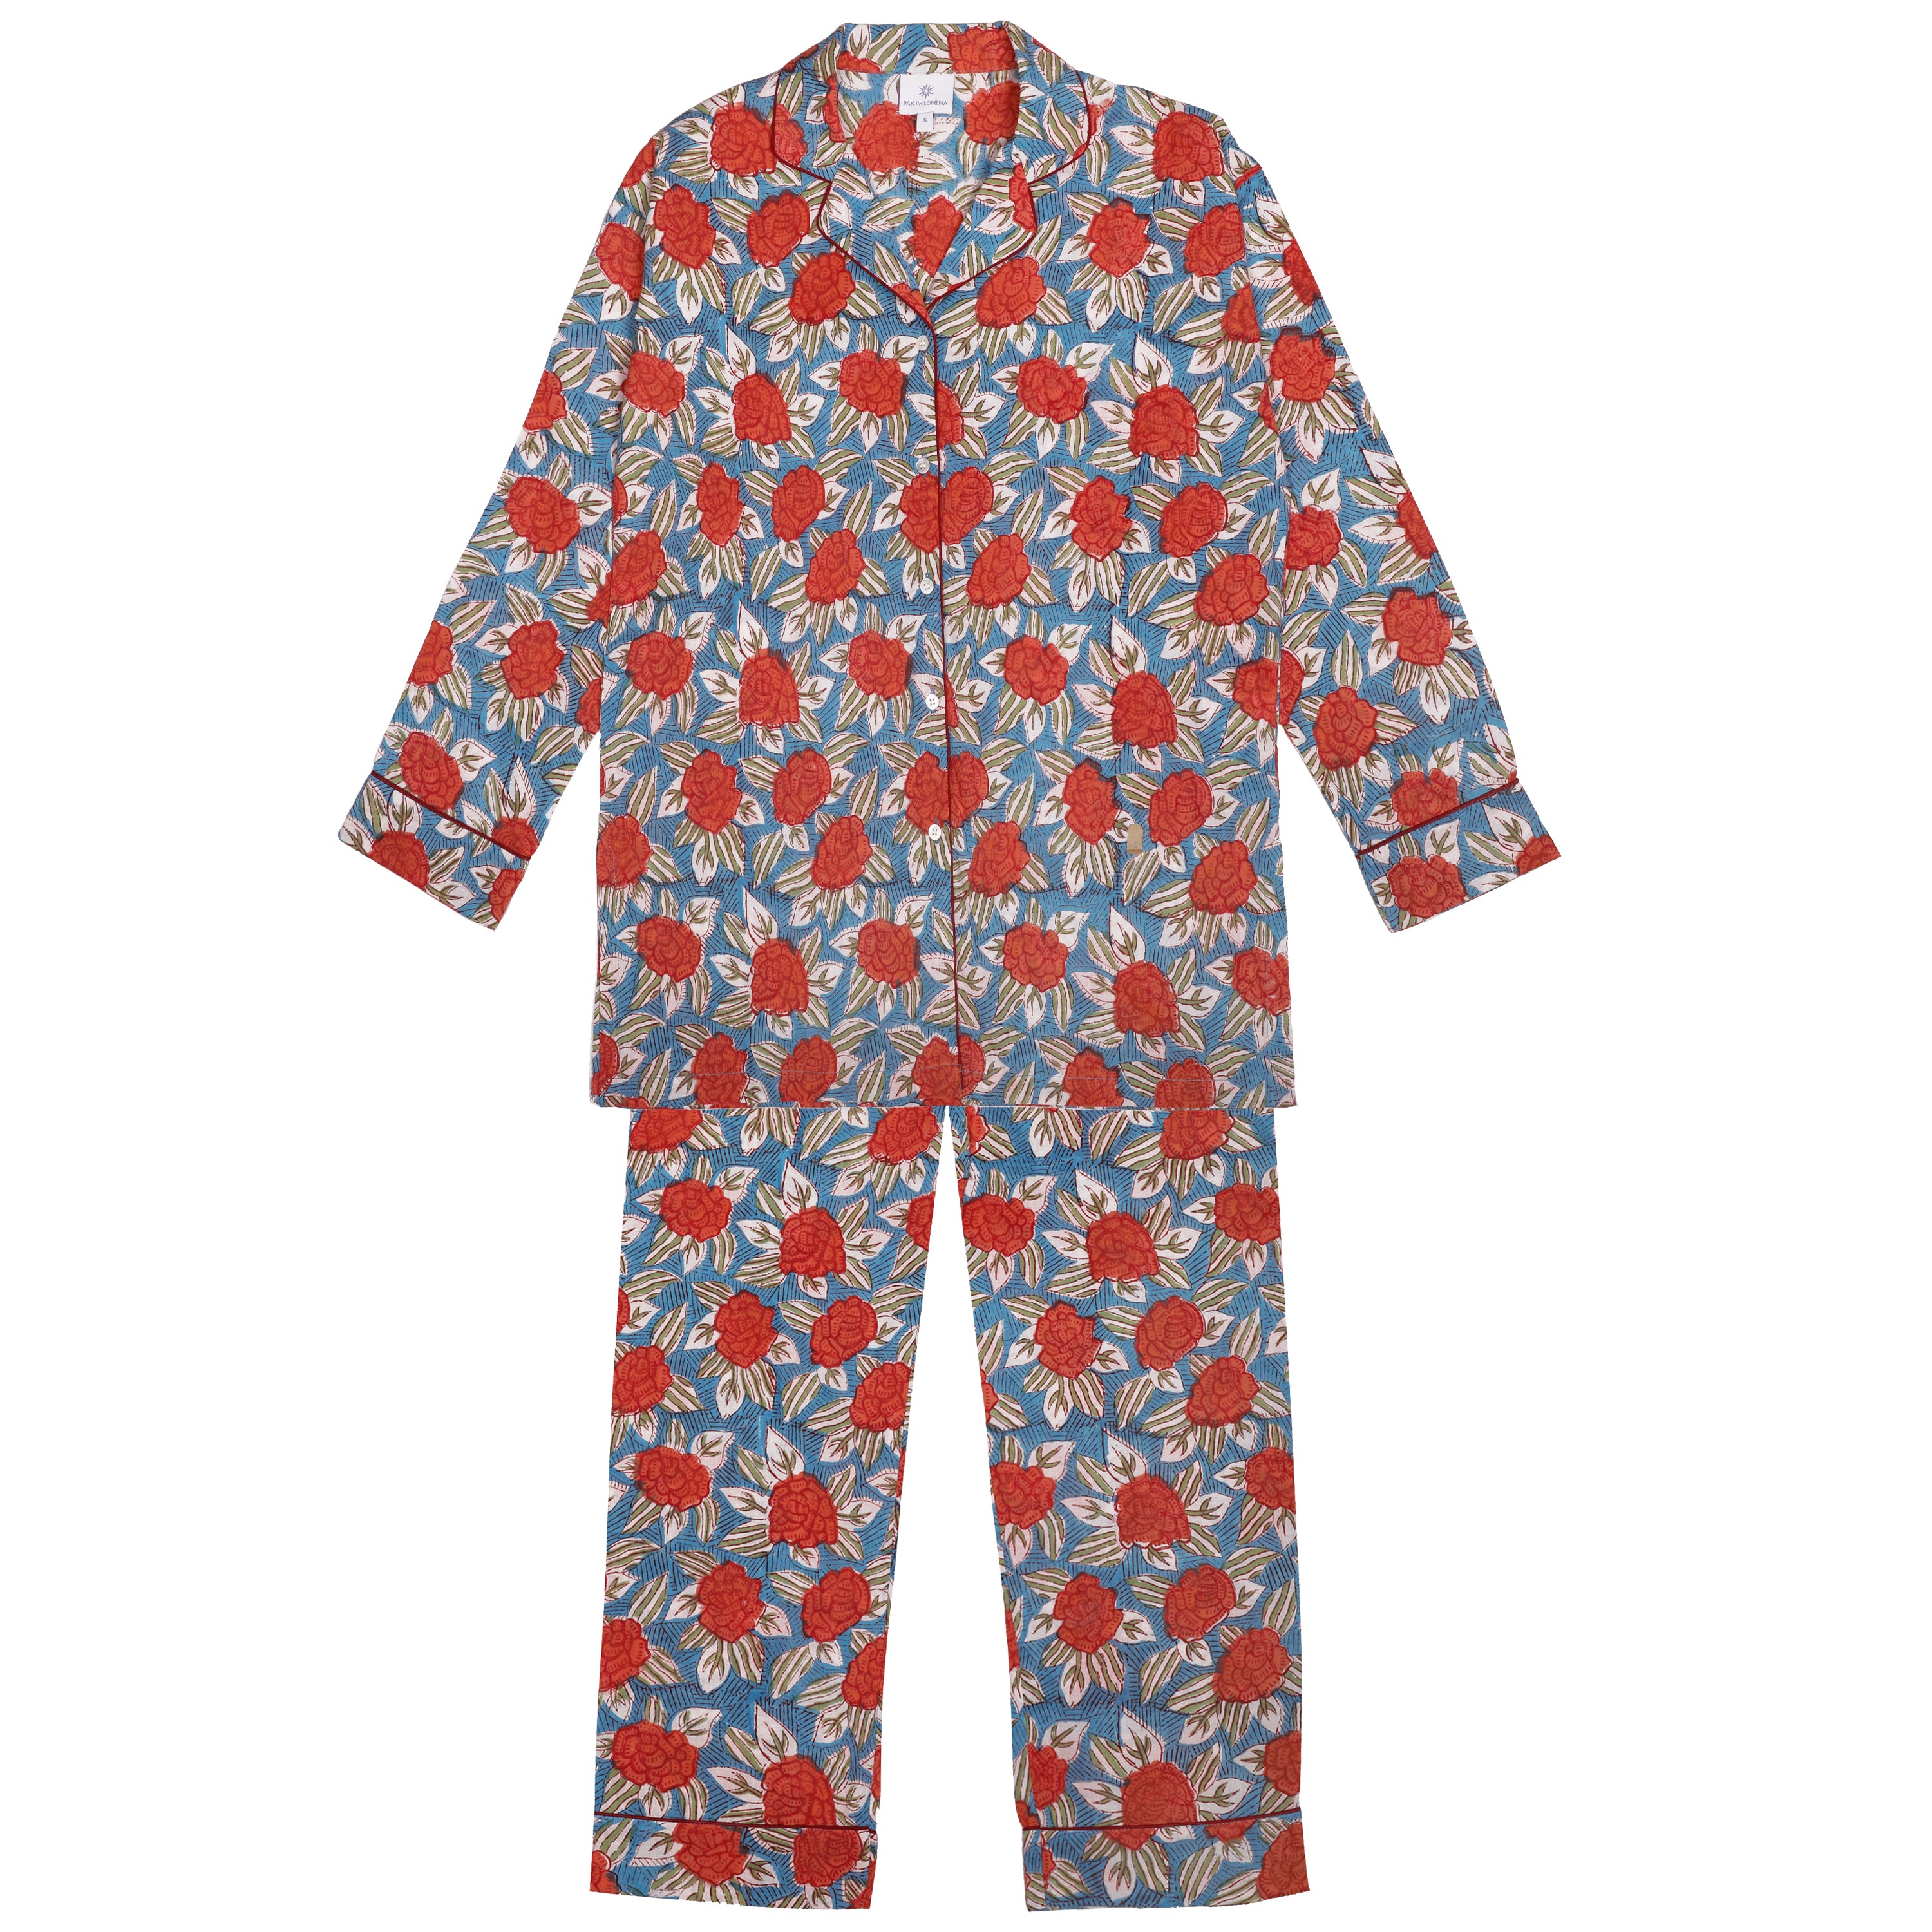 Marie Floral Cotton Pajama Long Sleeves STORE CREDIT EXCHANGE ONLY